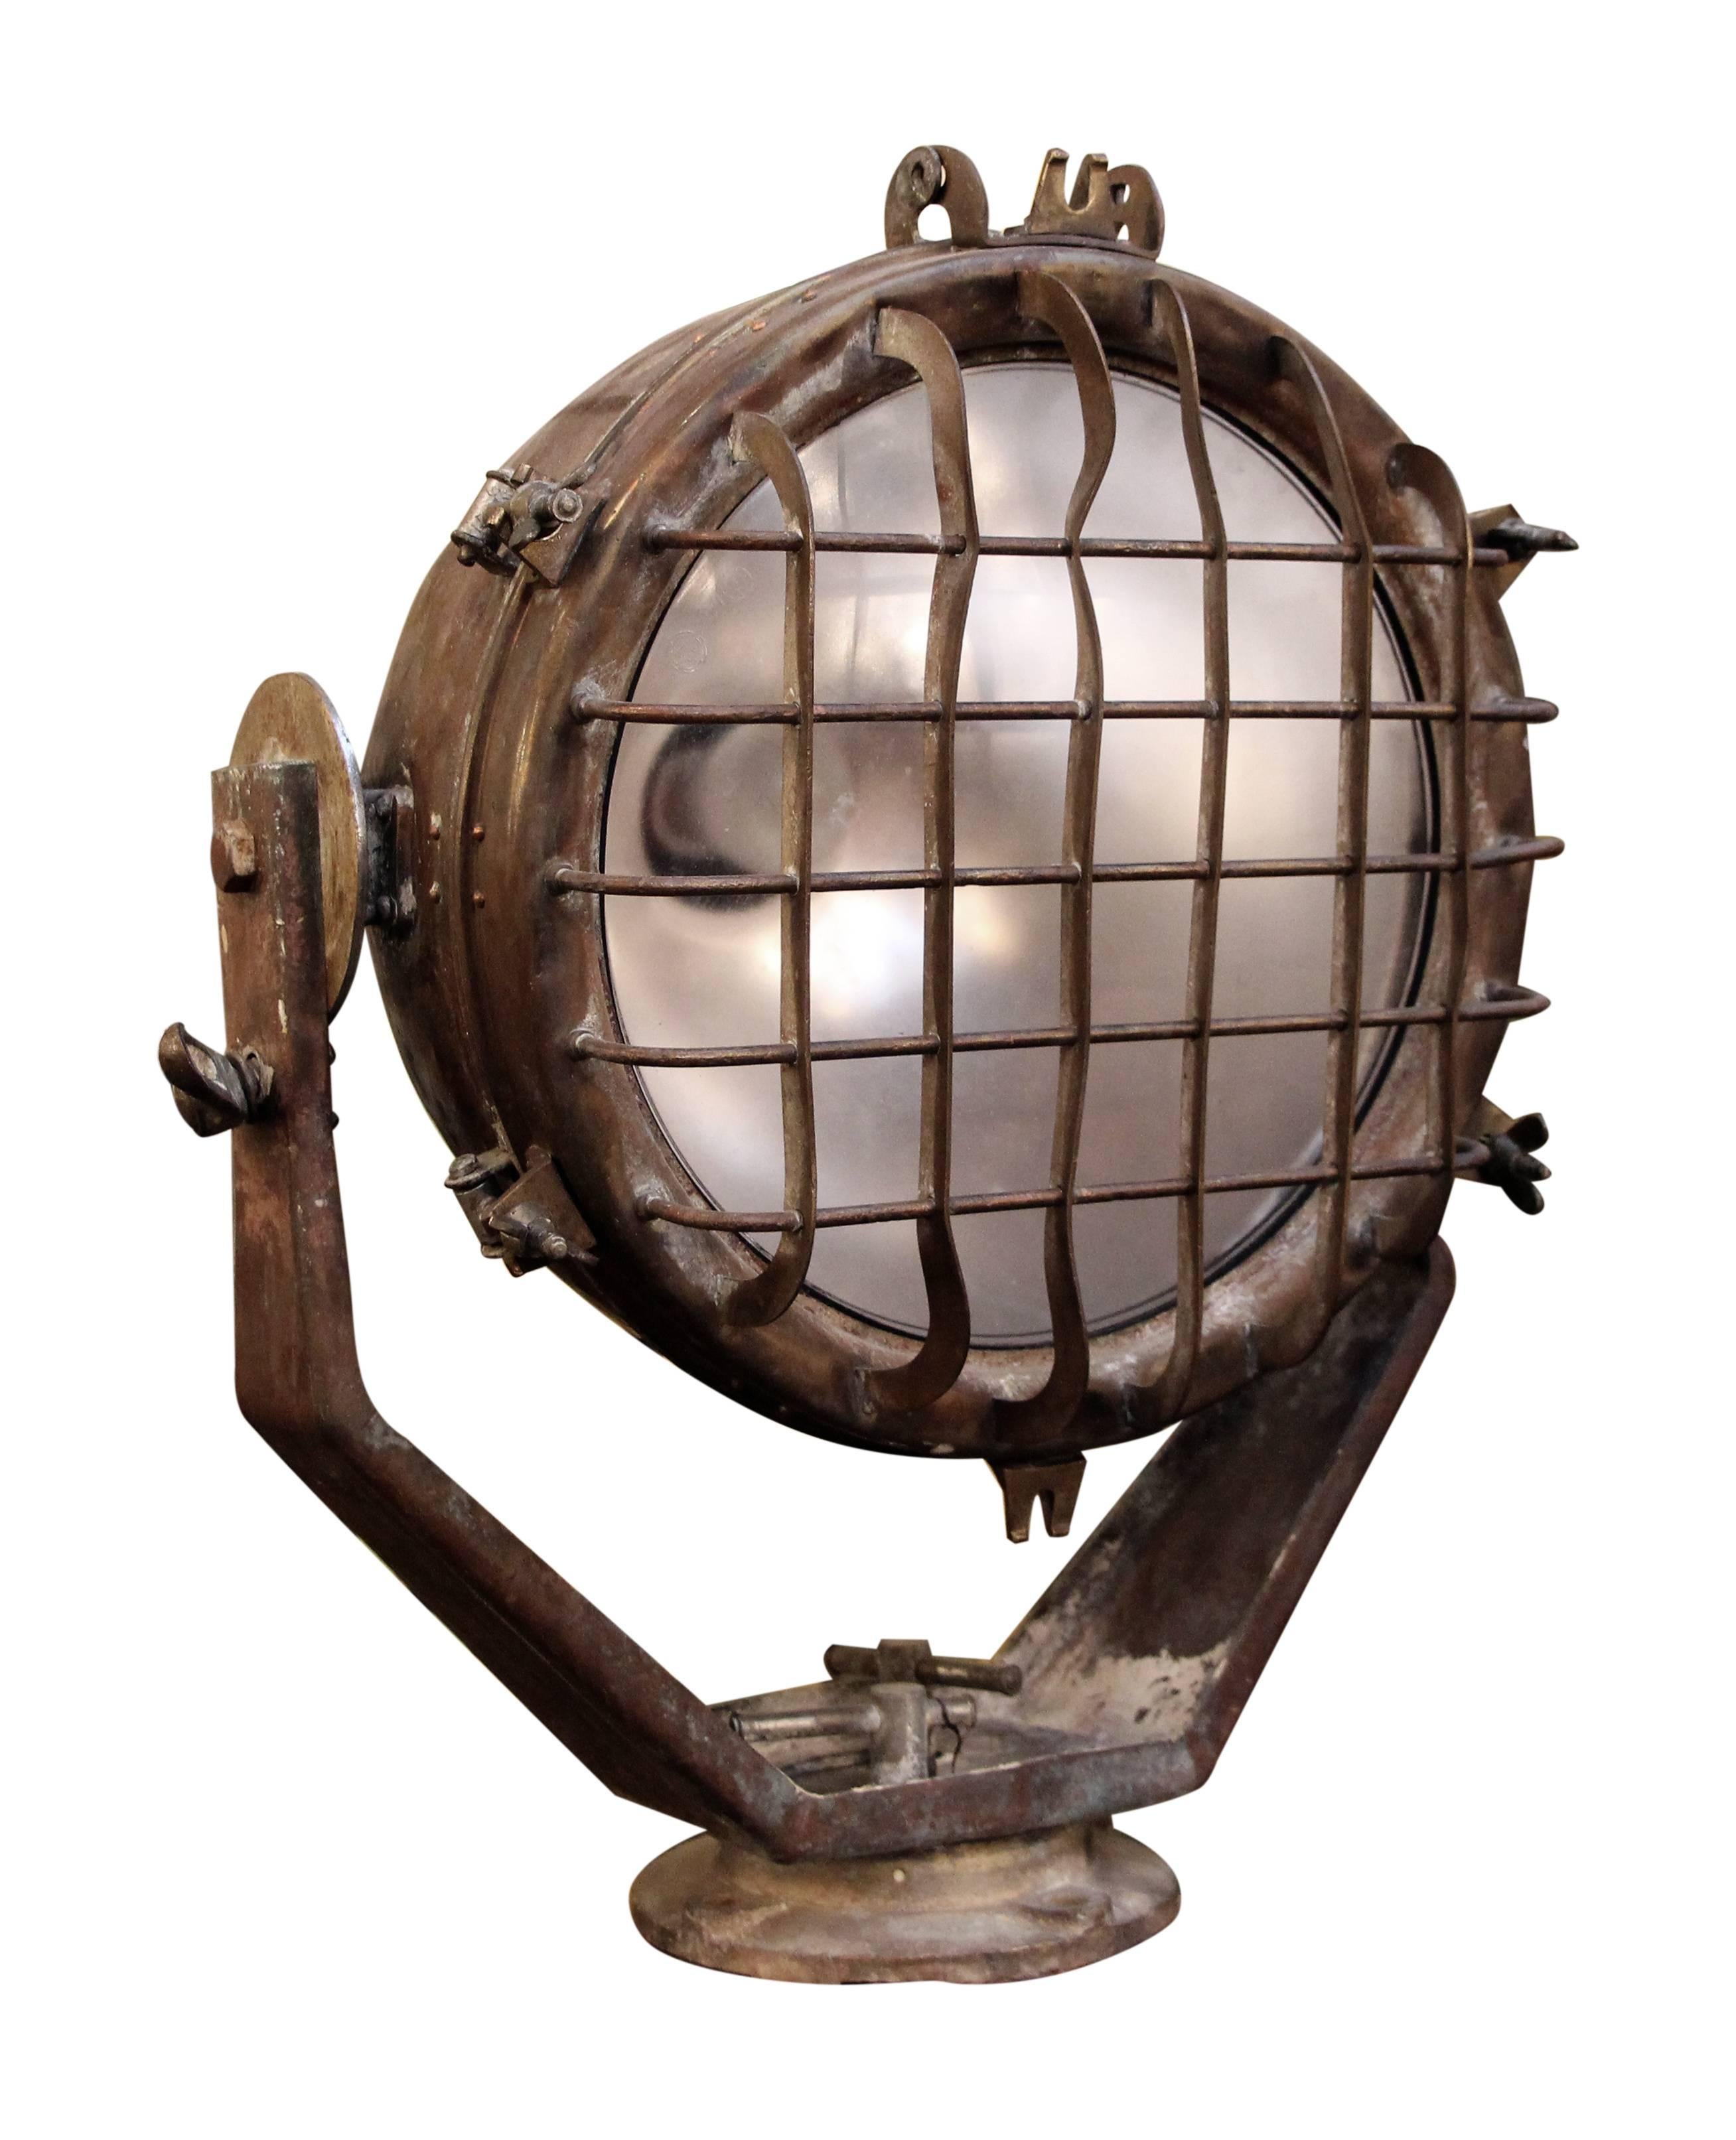 1930s adjustable large brass ship spotlight with wire cage. This can be seen at our 1800 South Grand Ave location in Downtown LA.